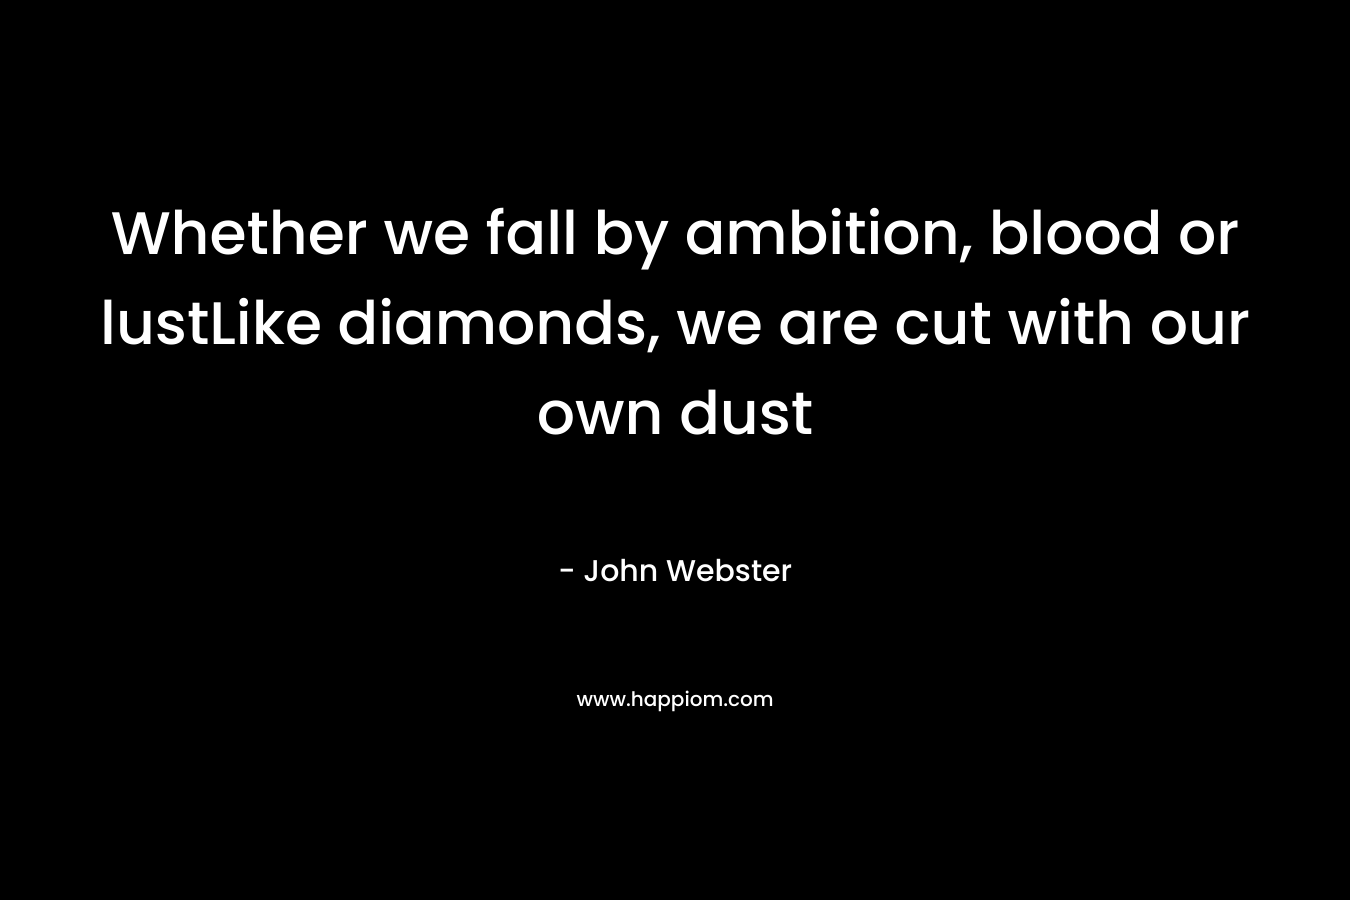 Whether we fall by ambition, blood or lustLike diamonds, we are cut with our own dust